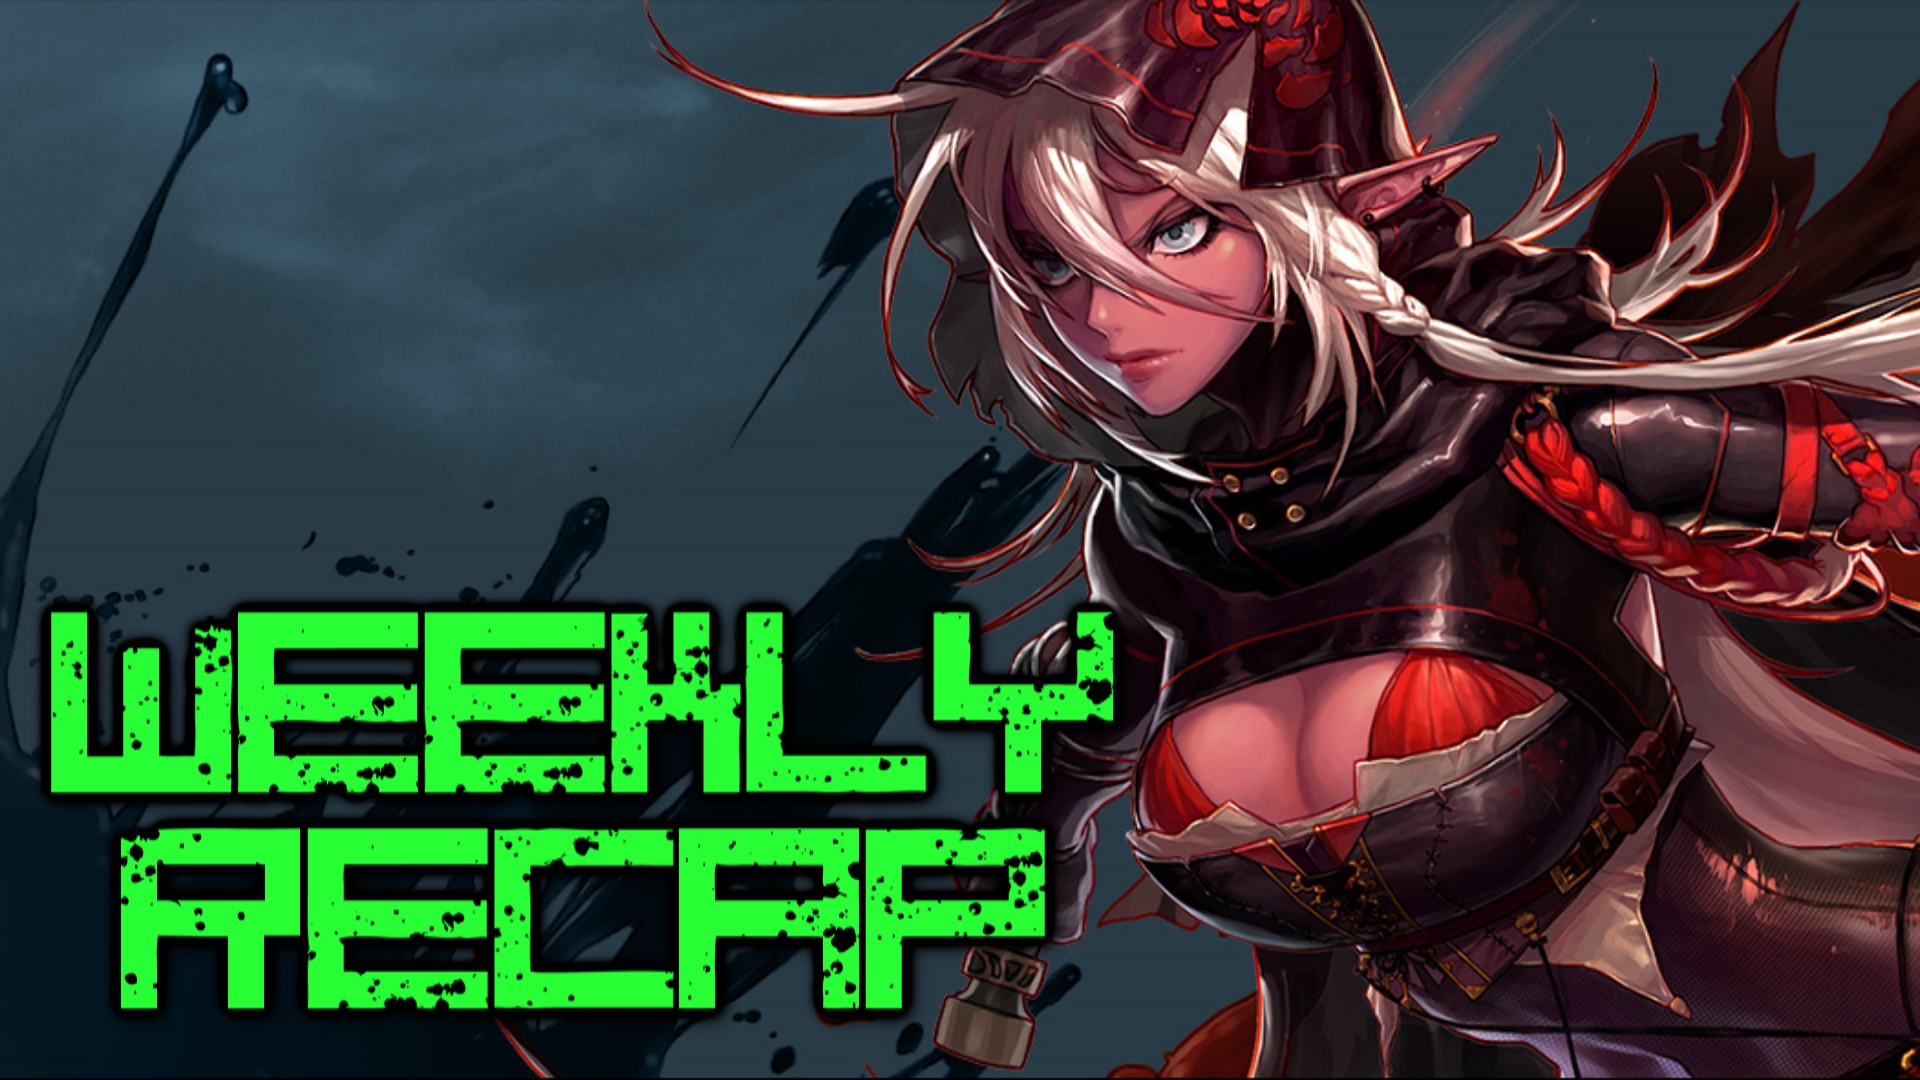 MMOHuts Weekly Recap #281 Mar. 14th - EverQuest Next, Paladins, DFO & More!